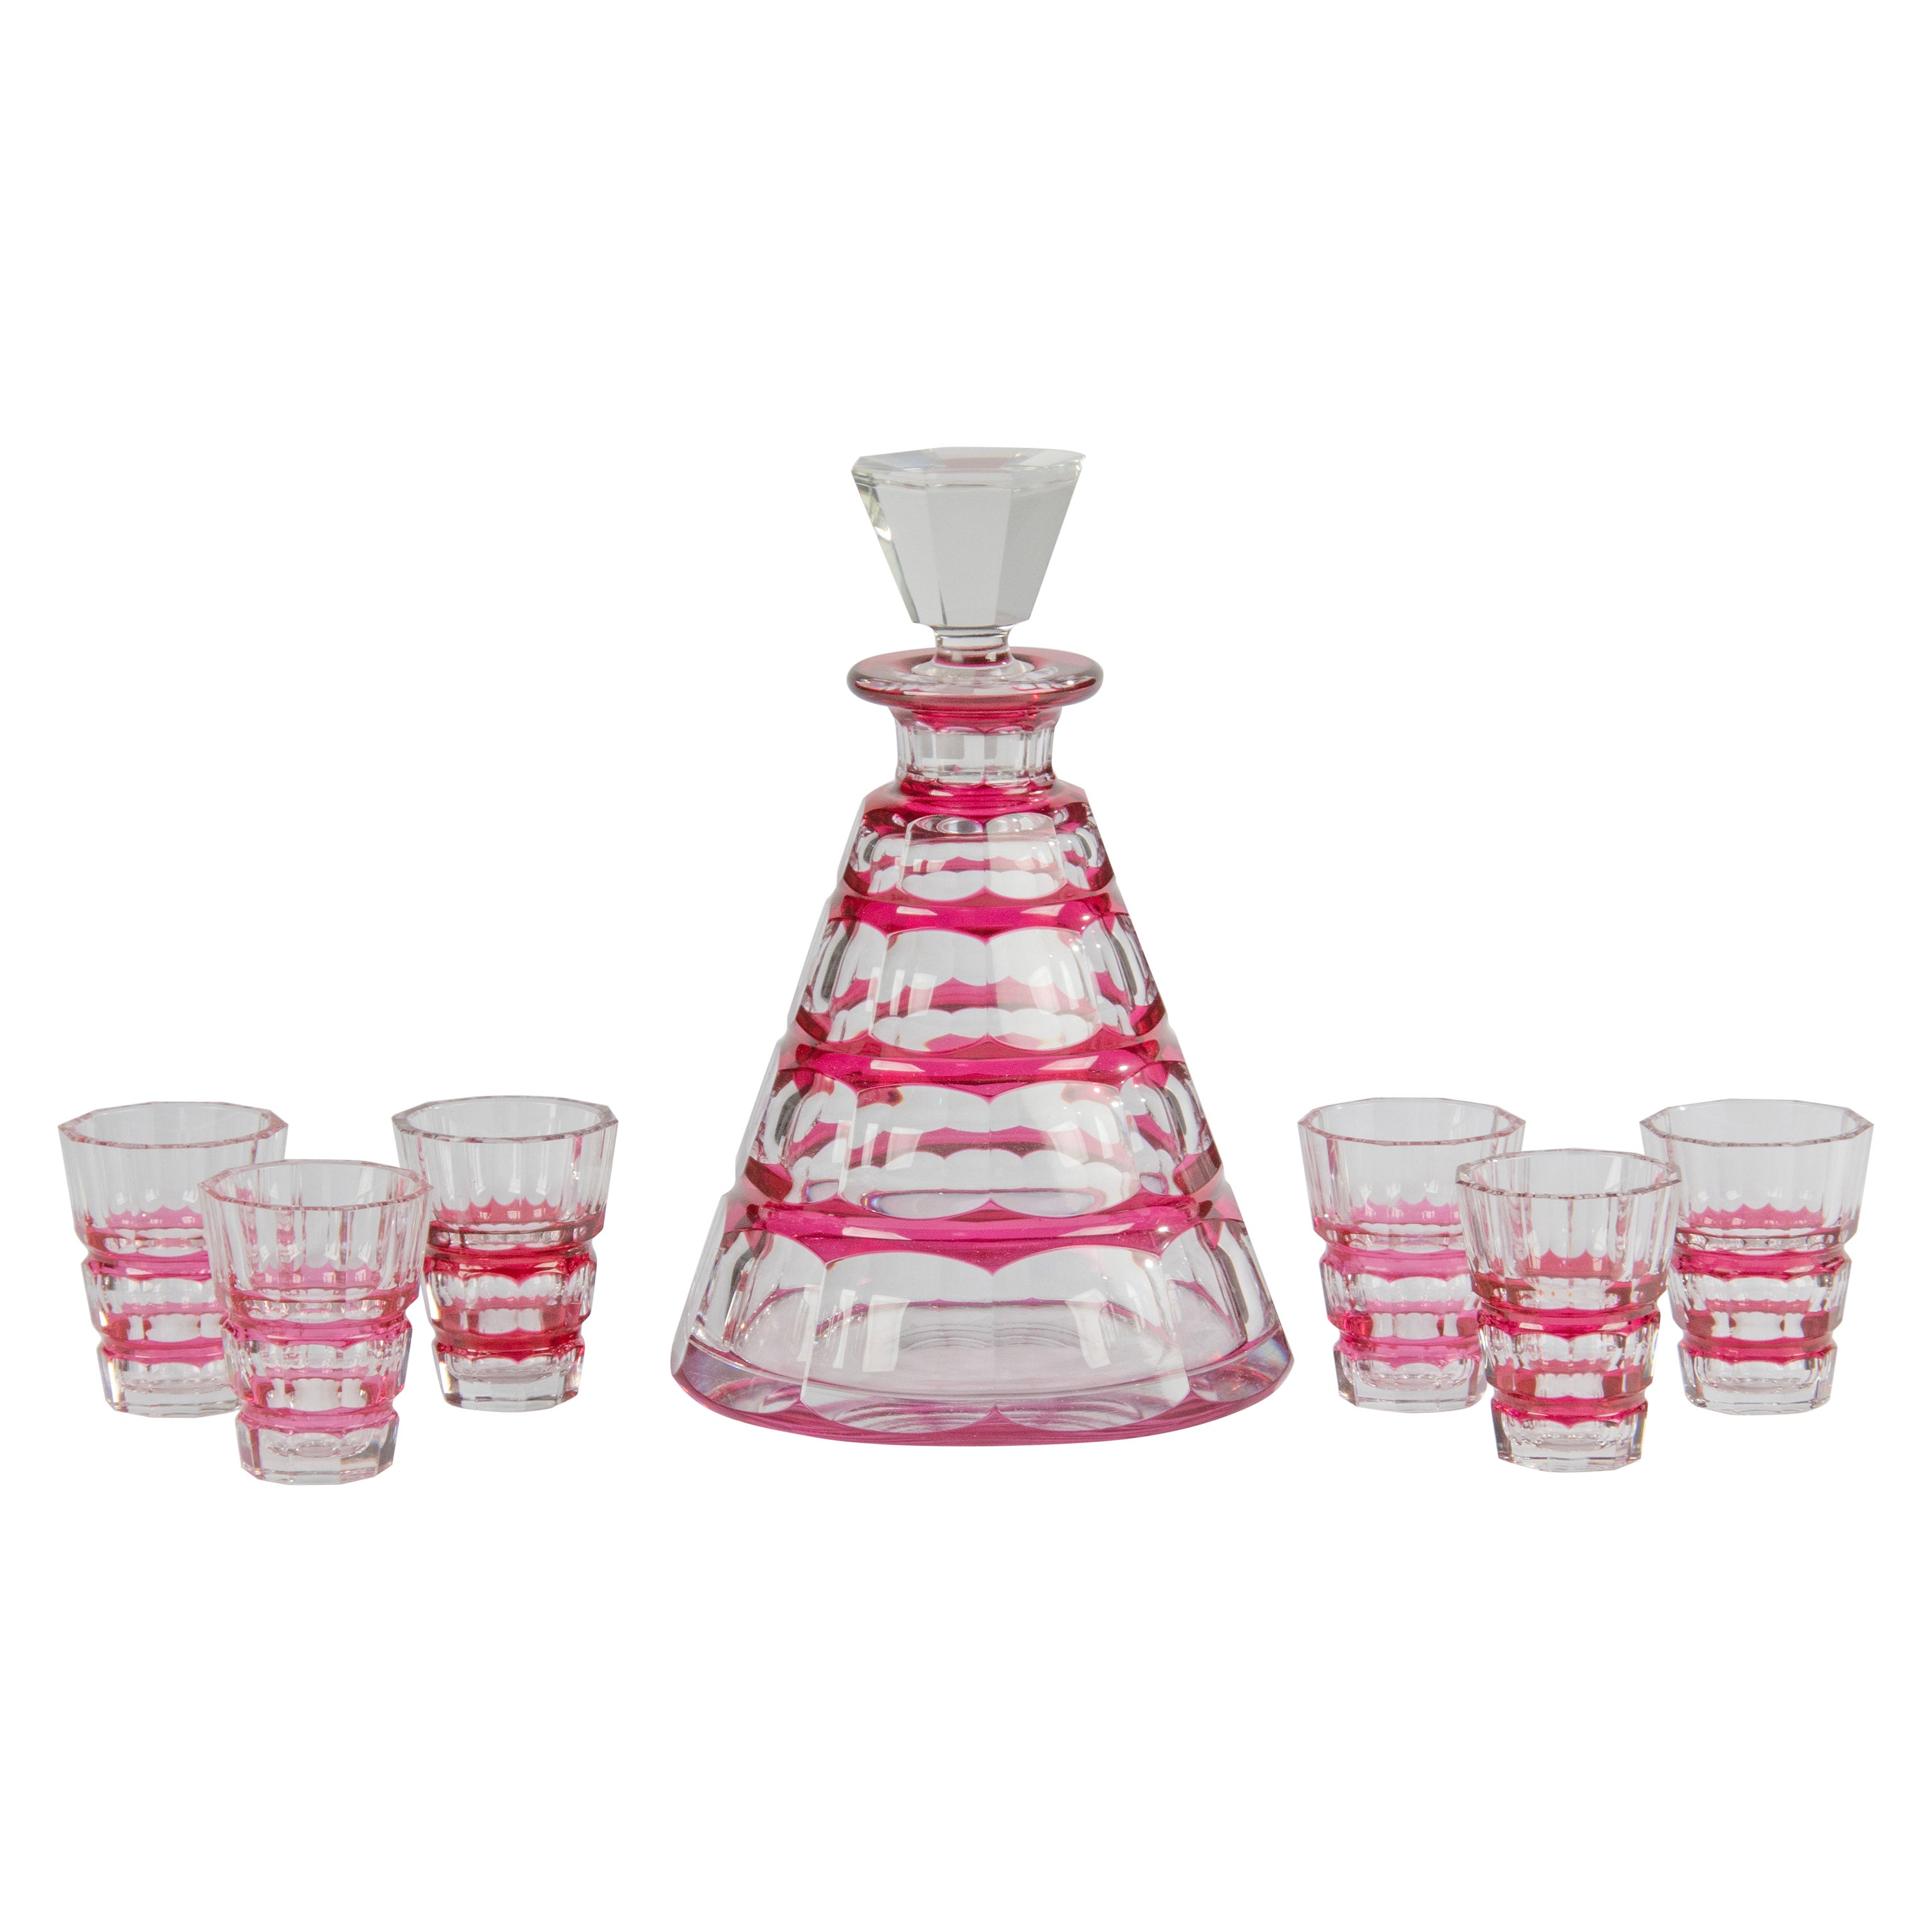 Early 20th Century Crystal Art Deco Decanter + 6 Glasses - Val Saint Lambert For Sale